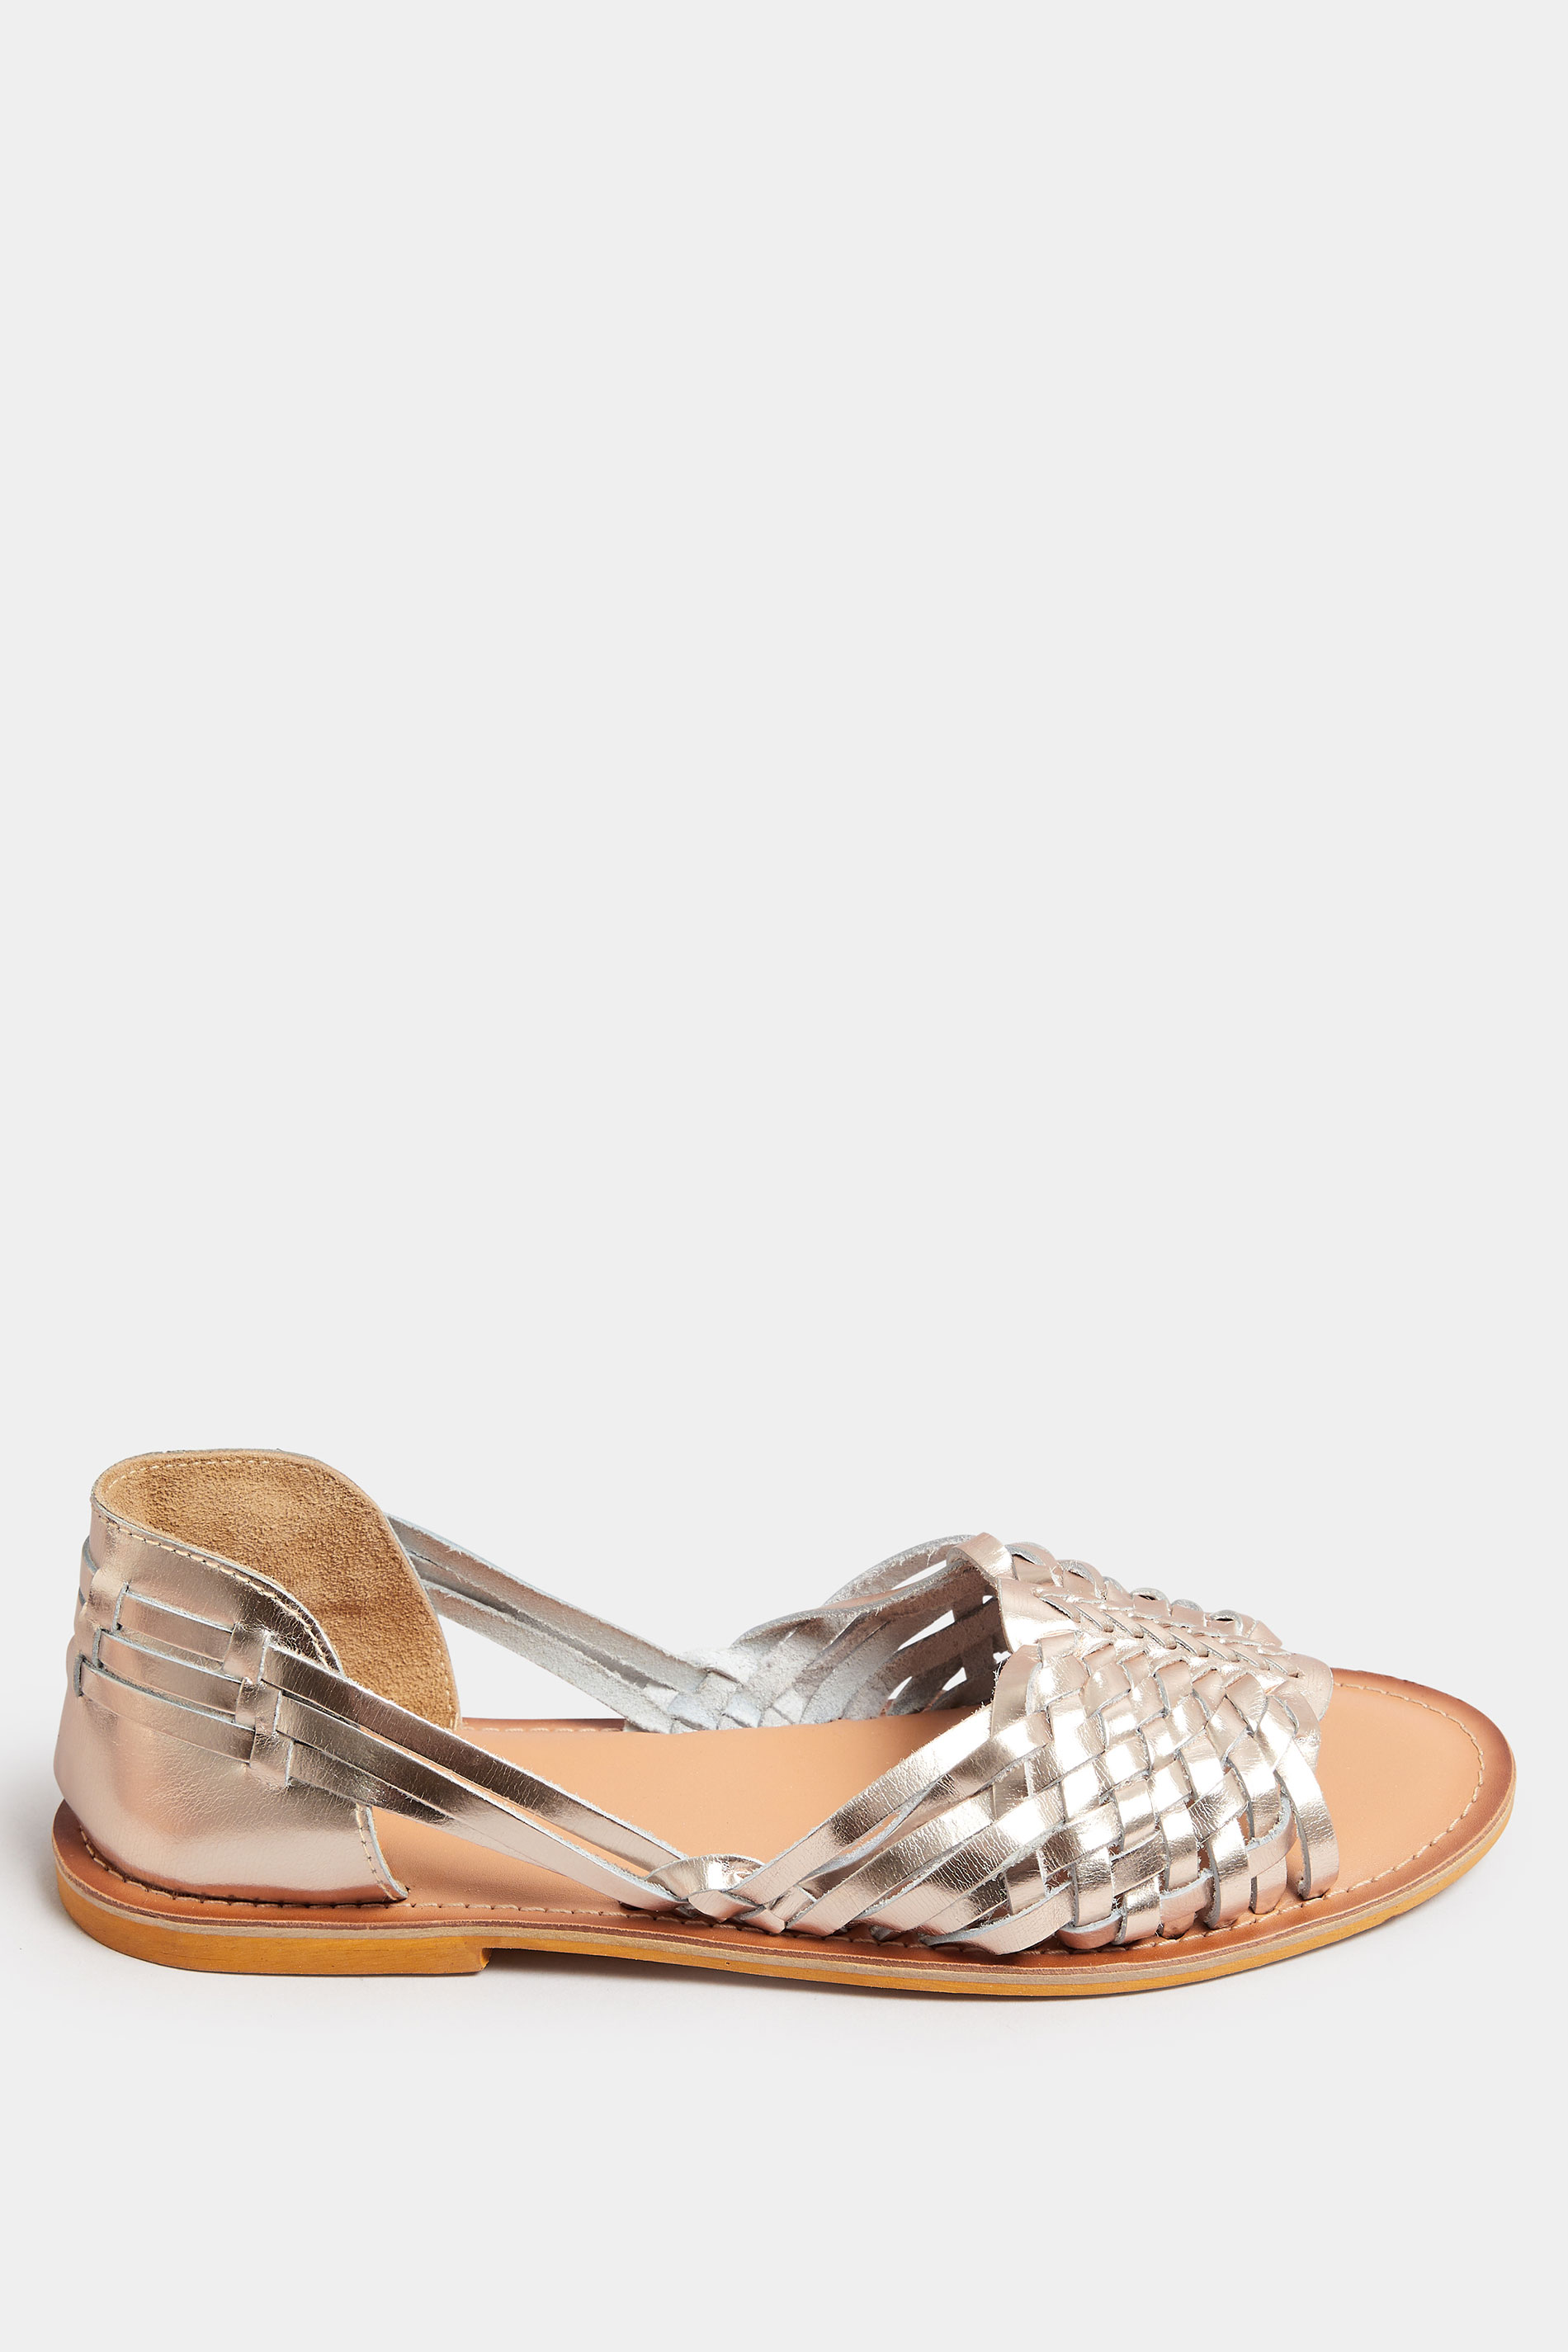 Gold Woven Leather Mules In Extra Wide EEE FIt | Yours Clothing 3